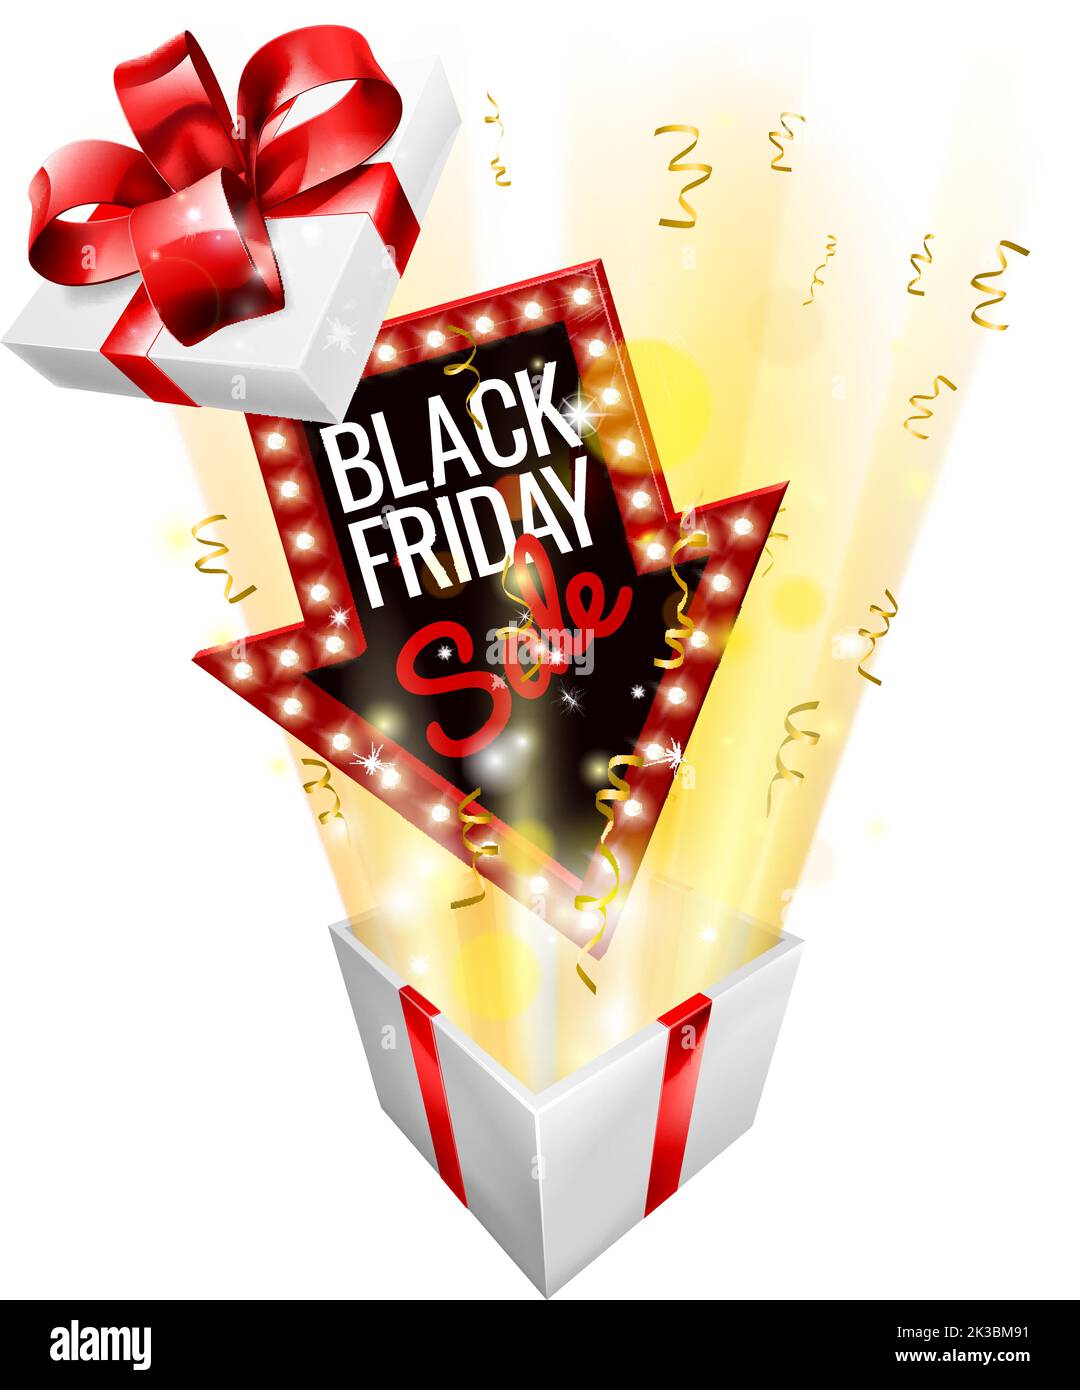 Black Friday Sale Gift Box Surprise Concept Stock Vector